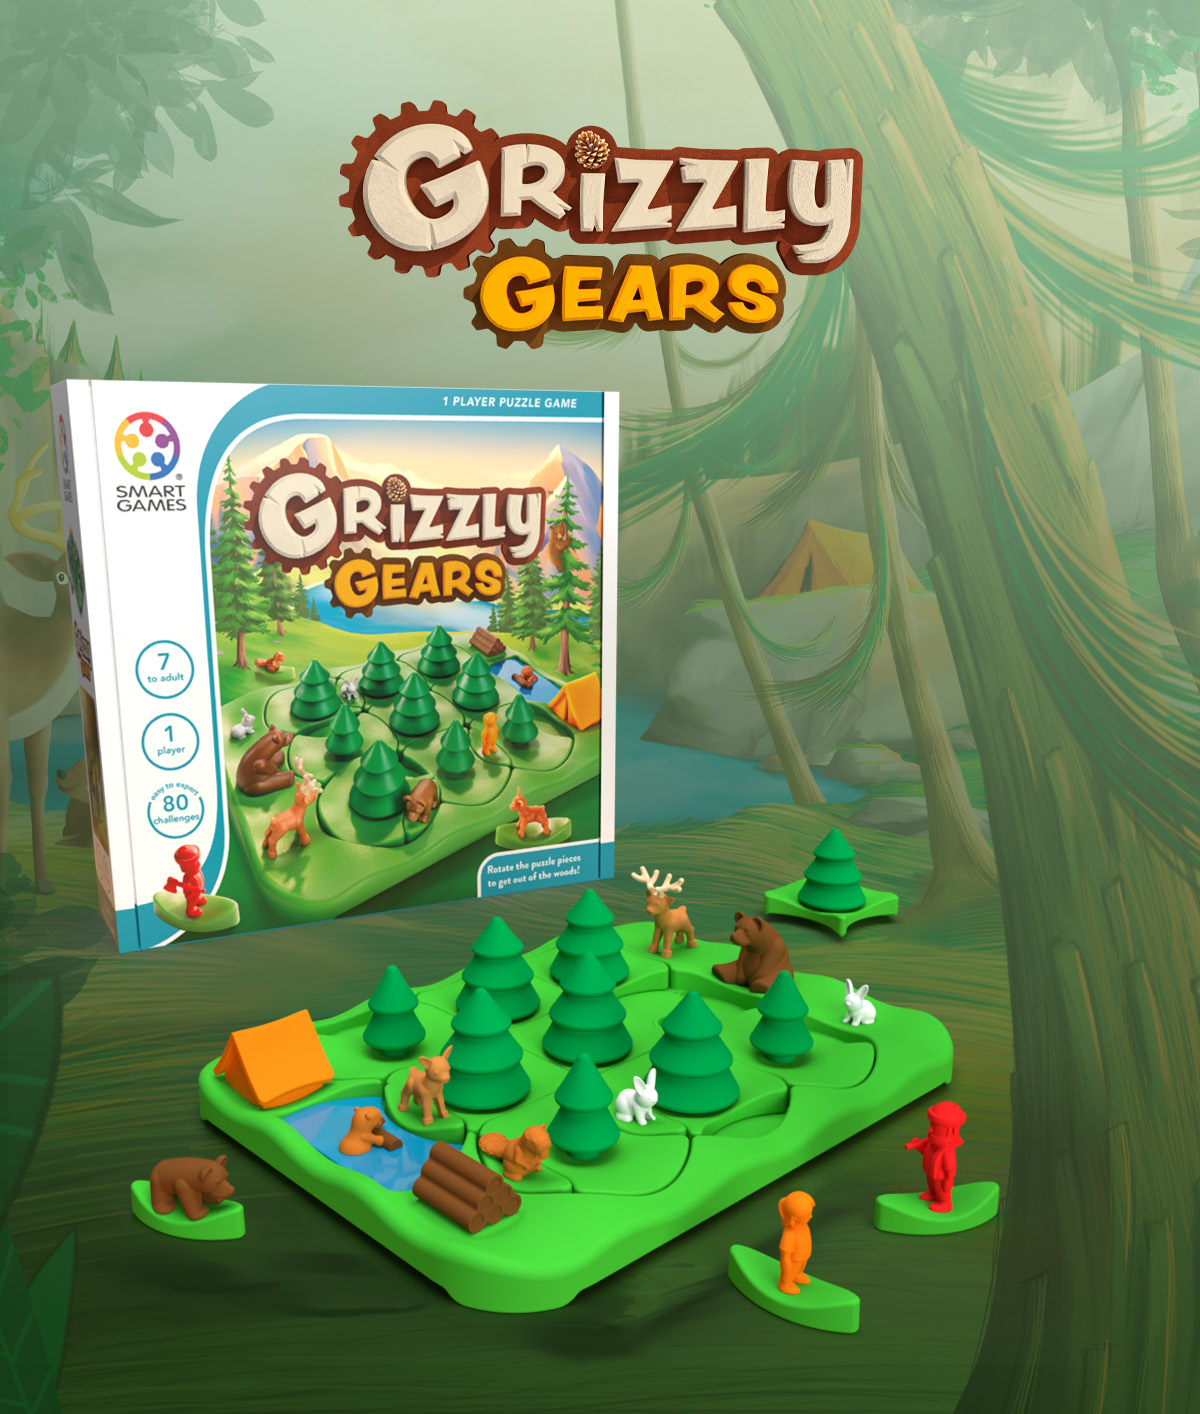 SmartGames Grizzly Gears Game with 80 Challenges for Ages 7 - Adult